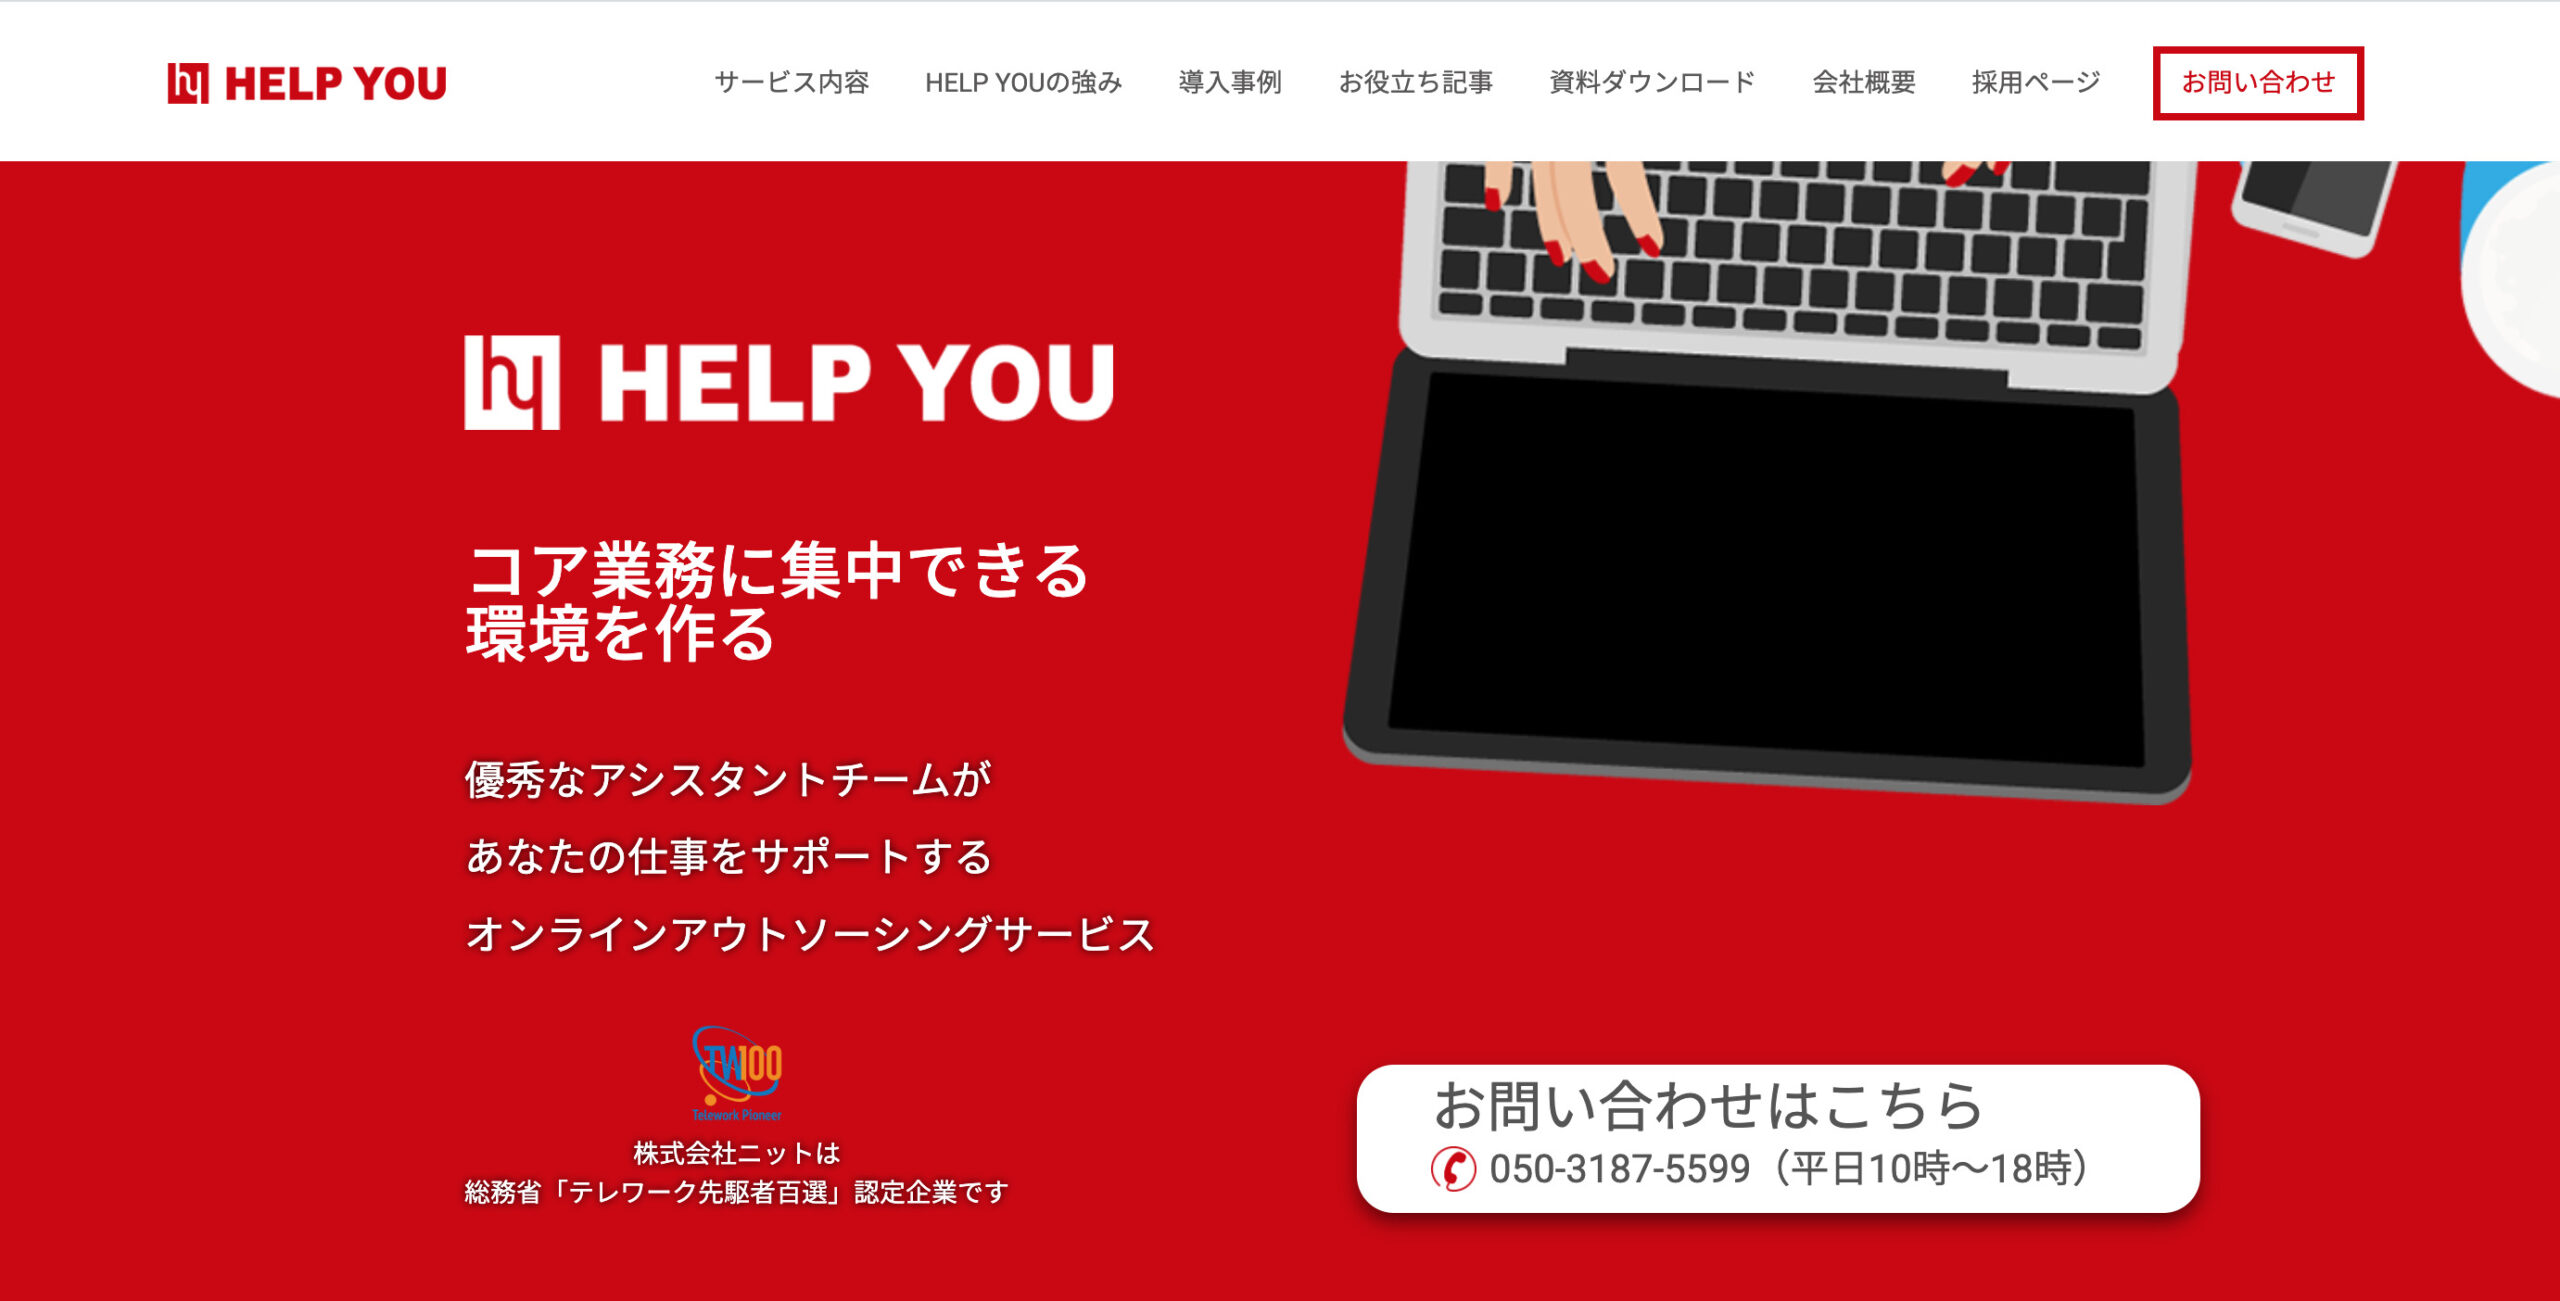 HELP YOU トップ